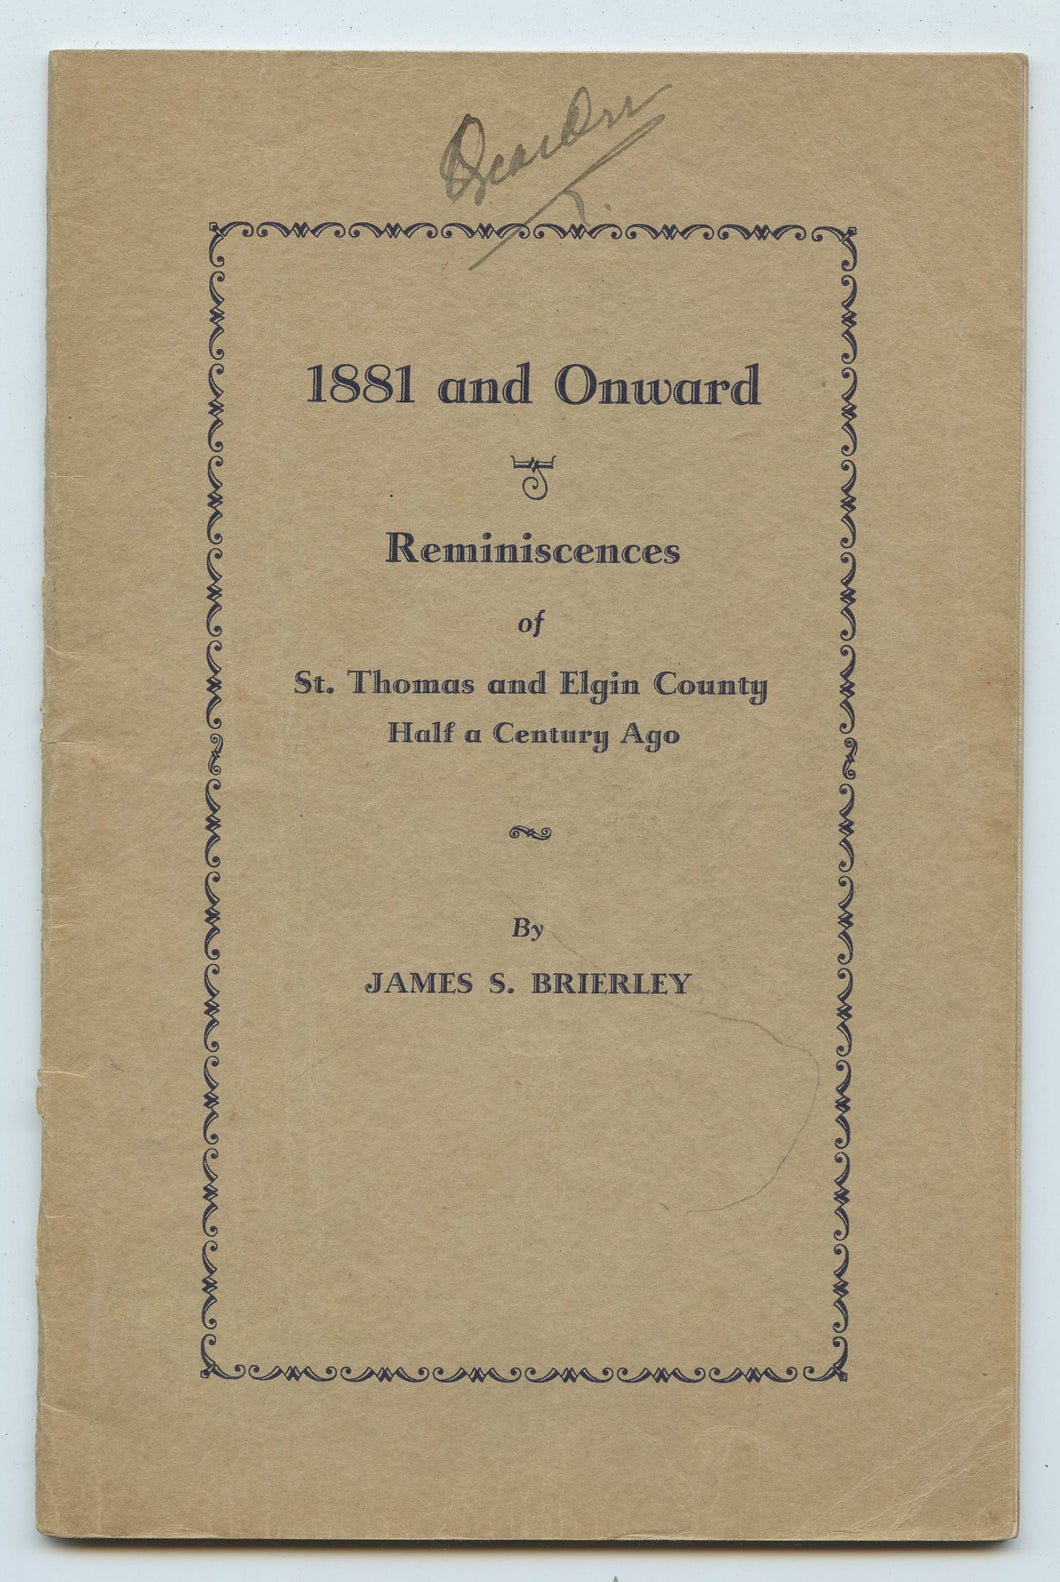 1881 and Onward: Reminiscences of St. Thomas and Elgin County Half a Century Ago